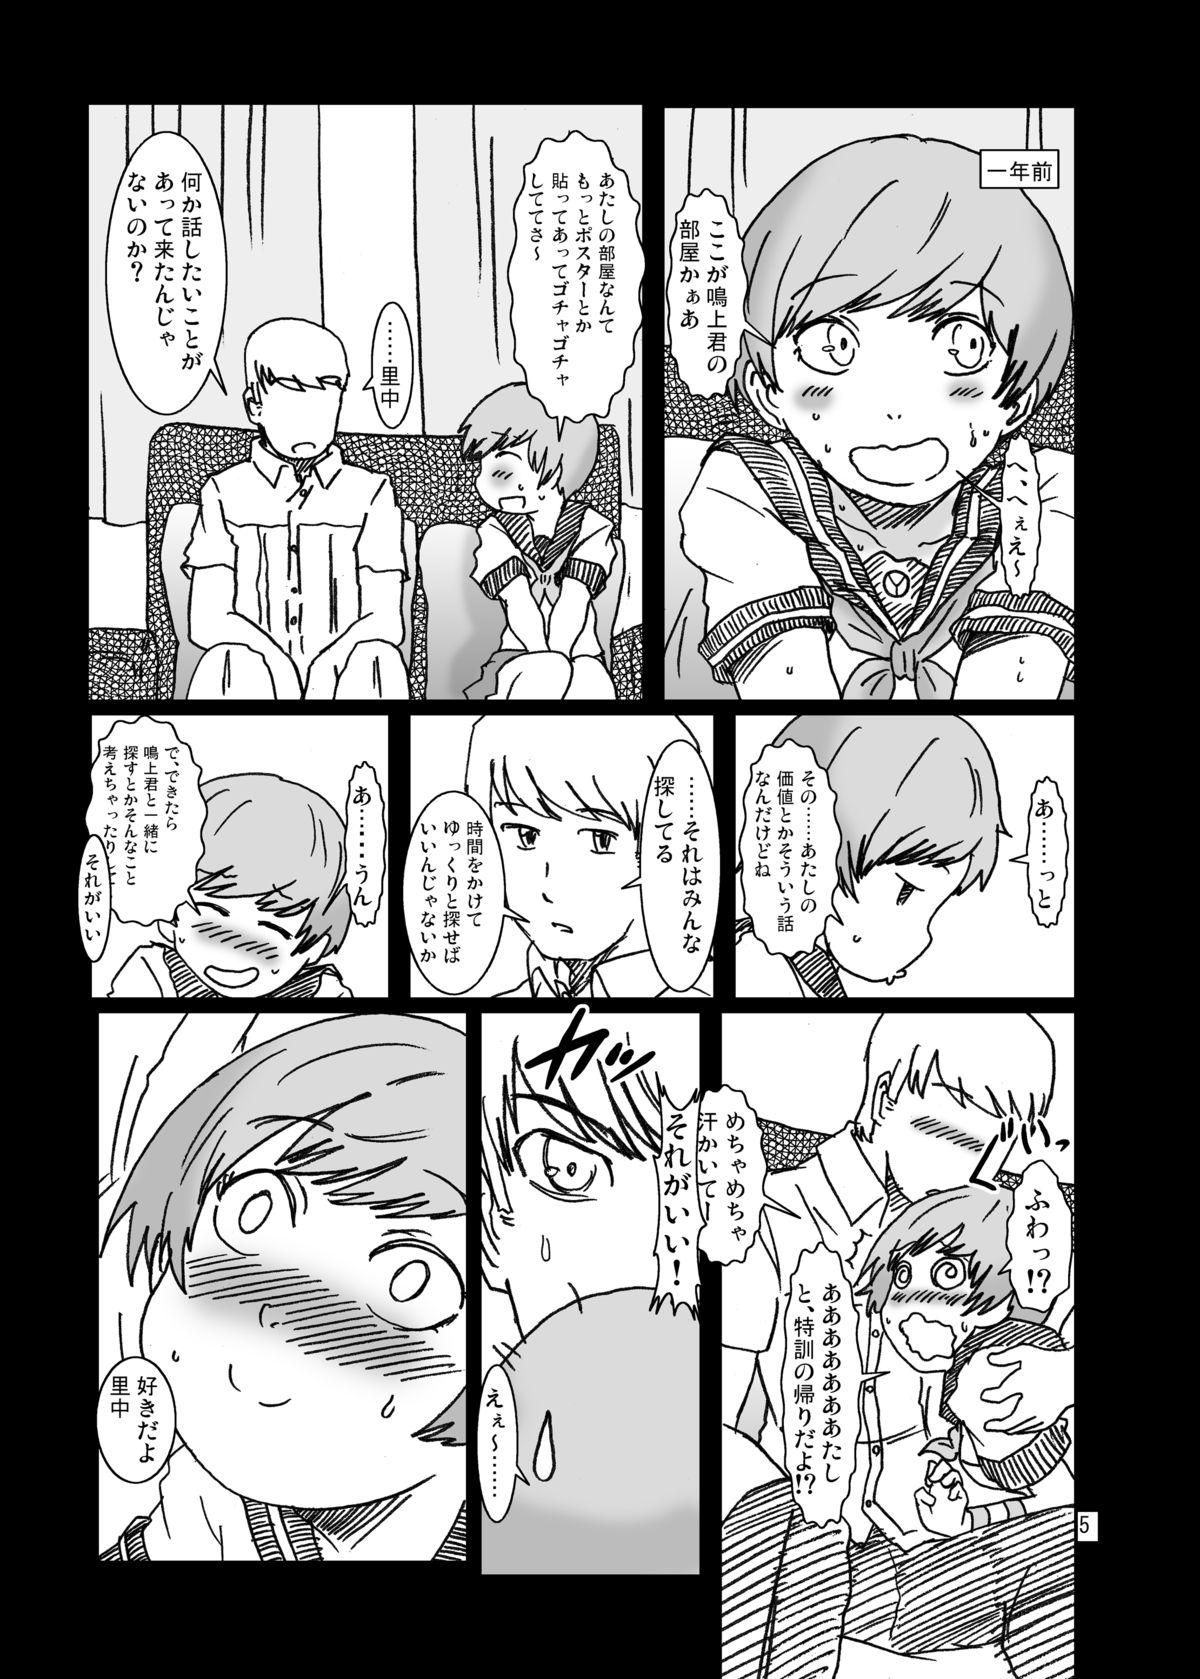 Jerk Off Inran Chie-chan Onsen Daisakusen! 4 - Persona 4 Pounded - Page 5